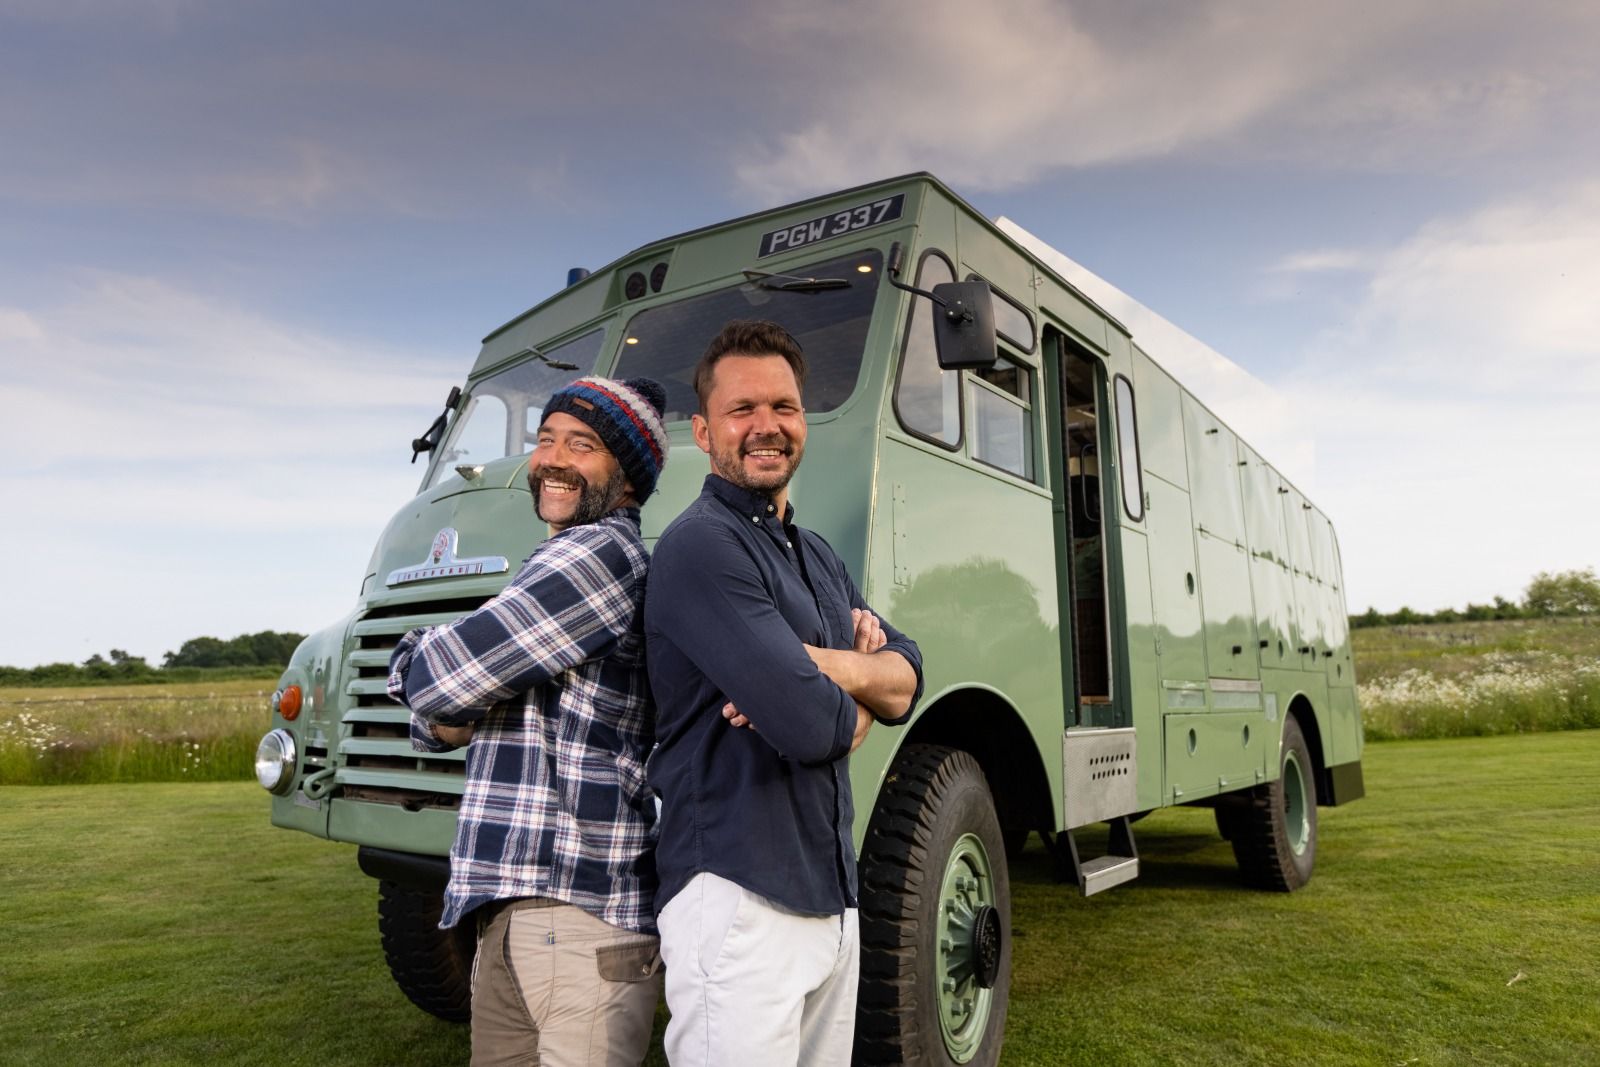 Jimmy Doherty and Jimmy De Ville bring Dream Builds’ Green Goddess to the Classic Motor Show